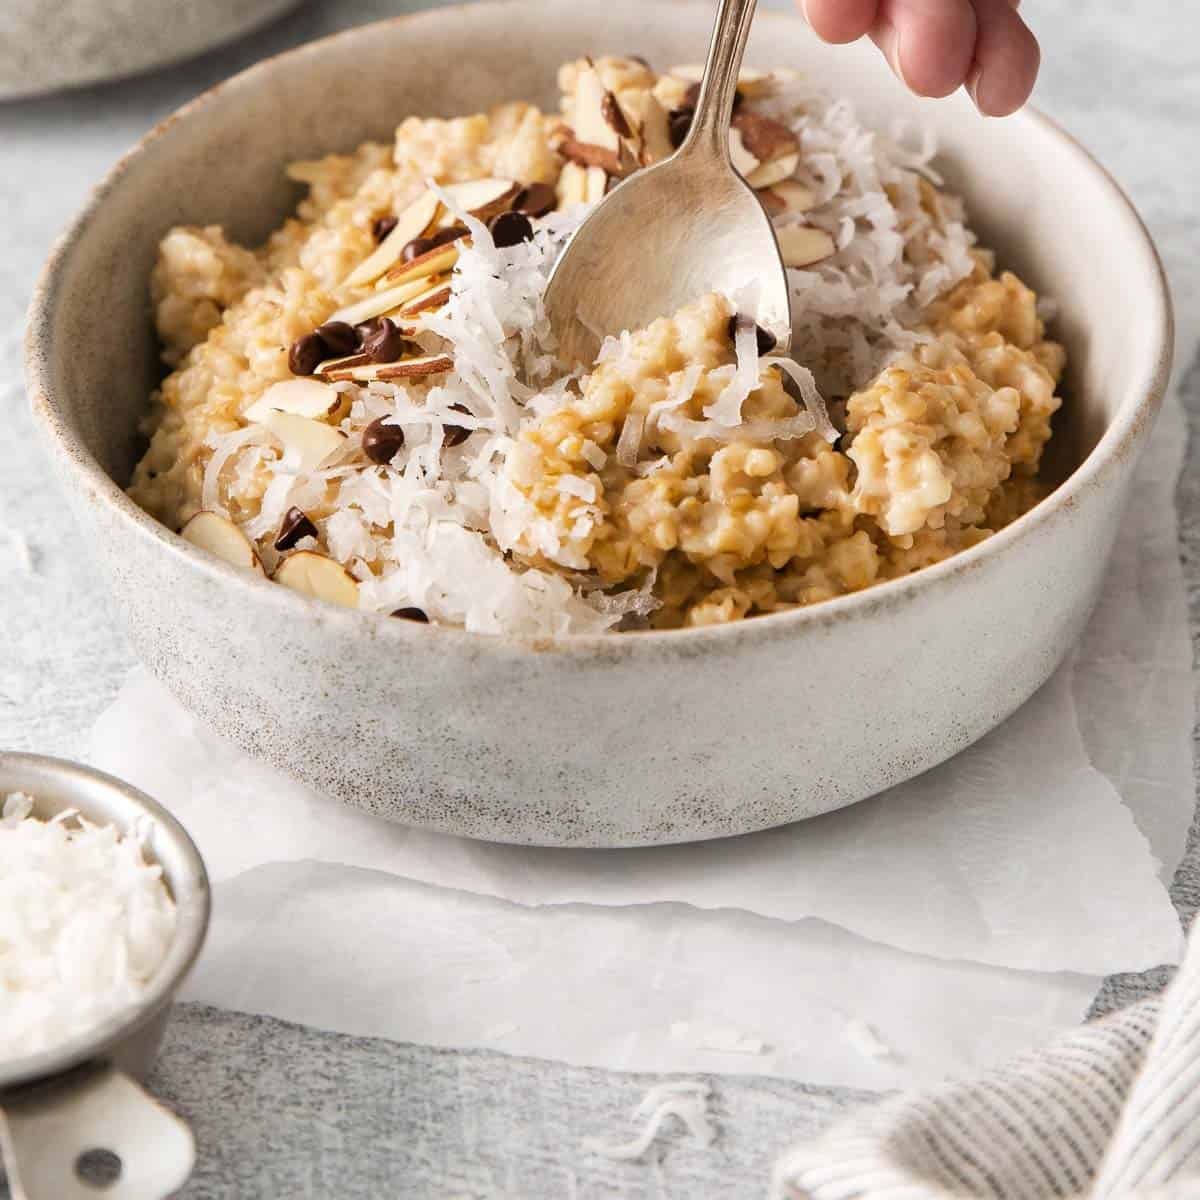 A bowl of steel cut oats with toppings and a spoon dipping into the oats